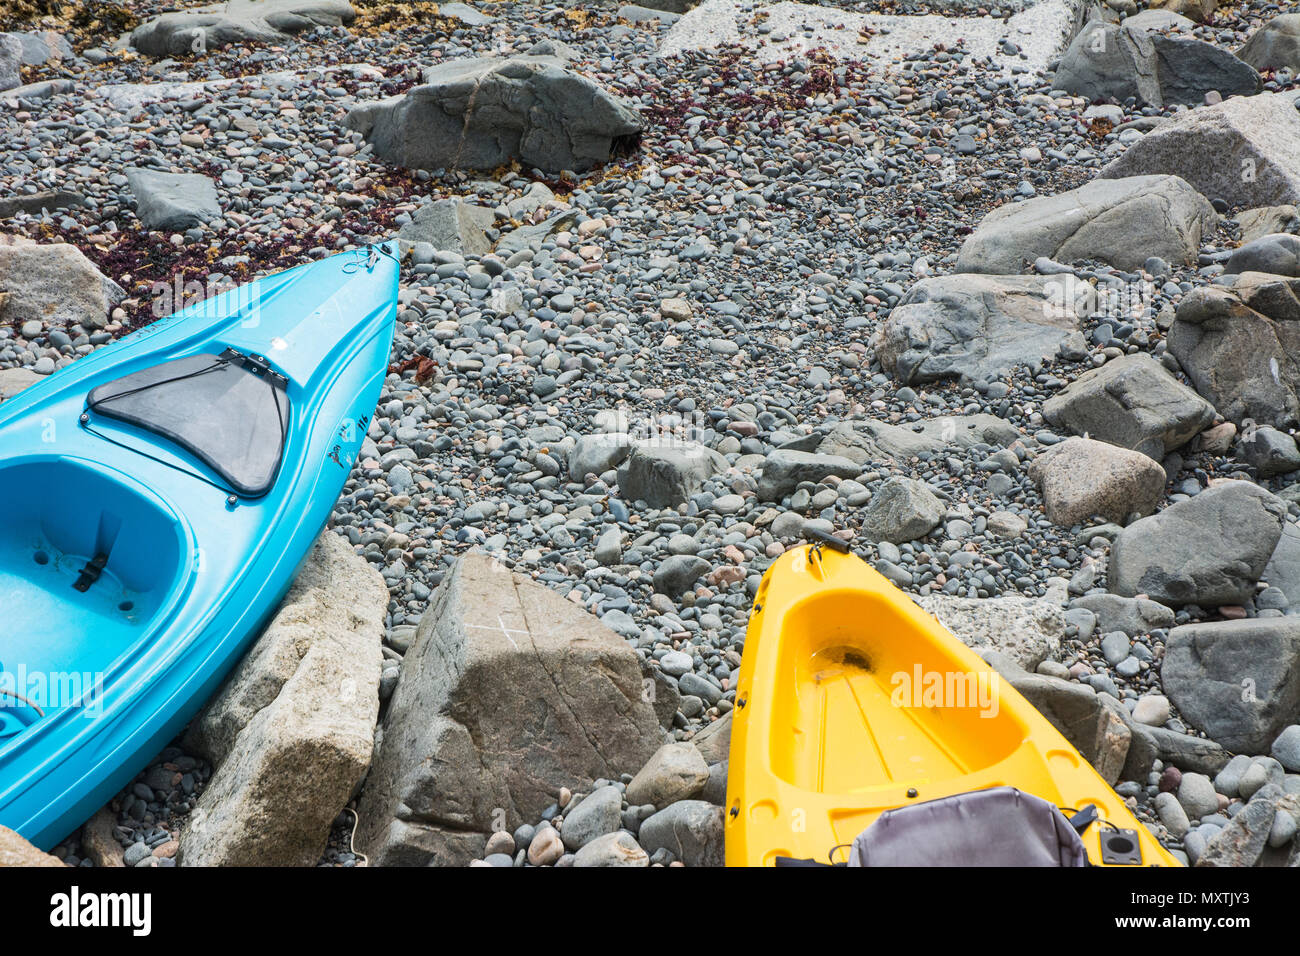 Two kayaks tied down on the rocky beach. Stock Photo